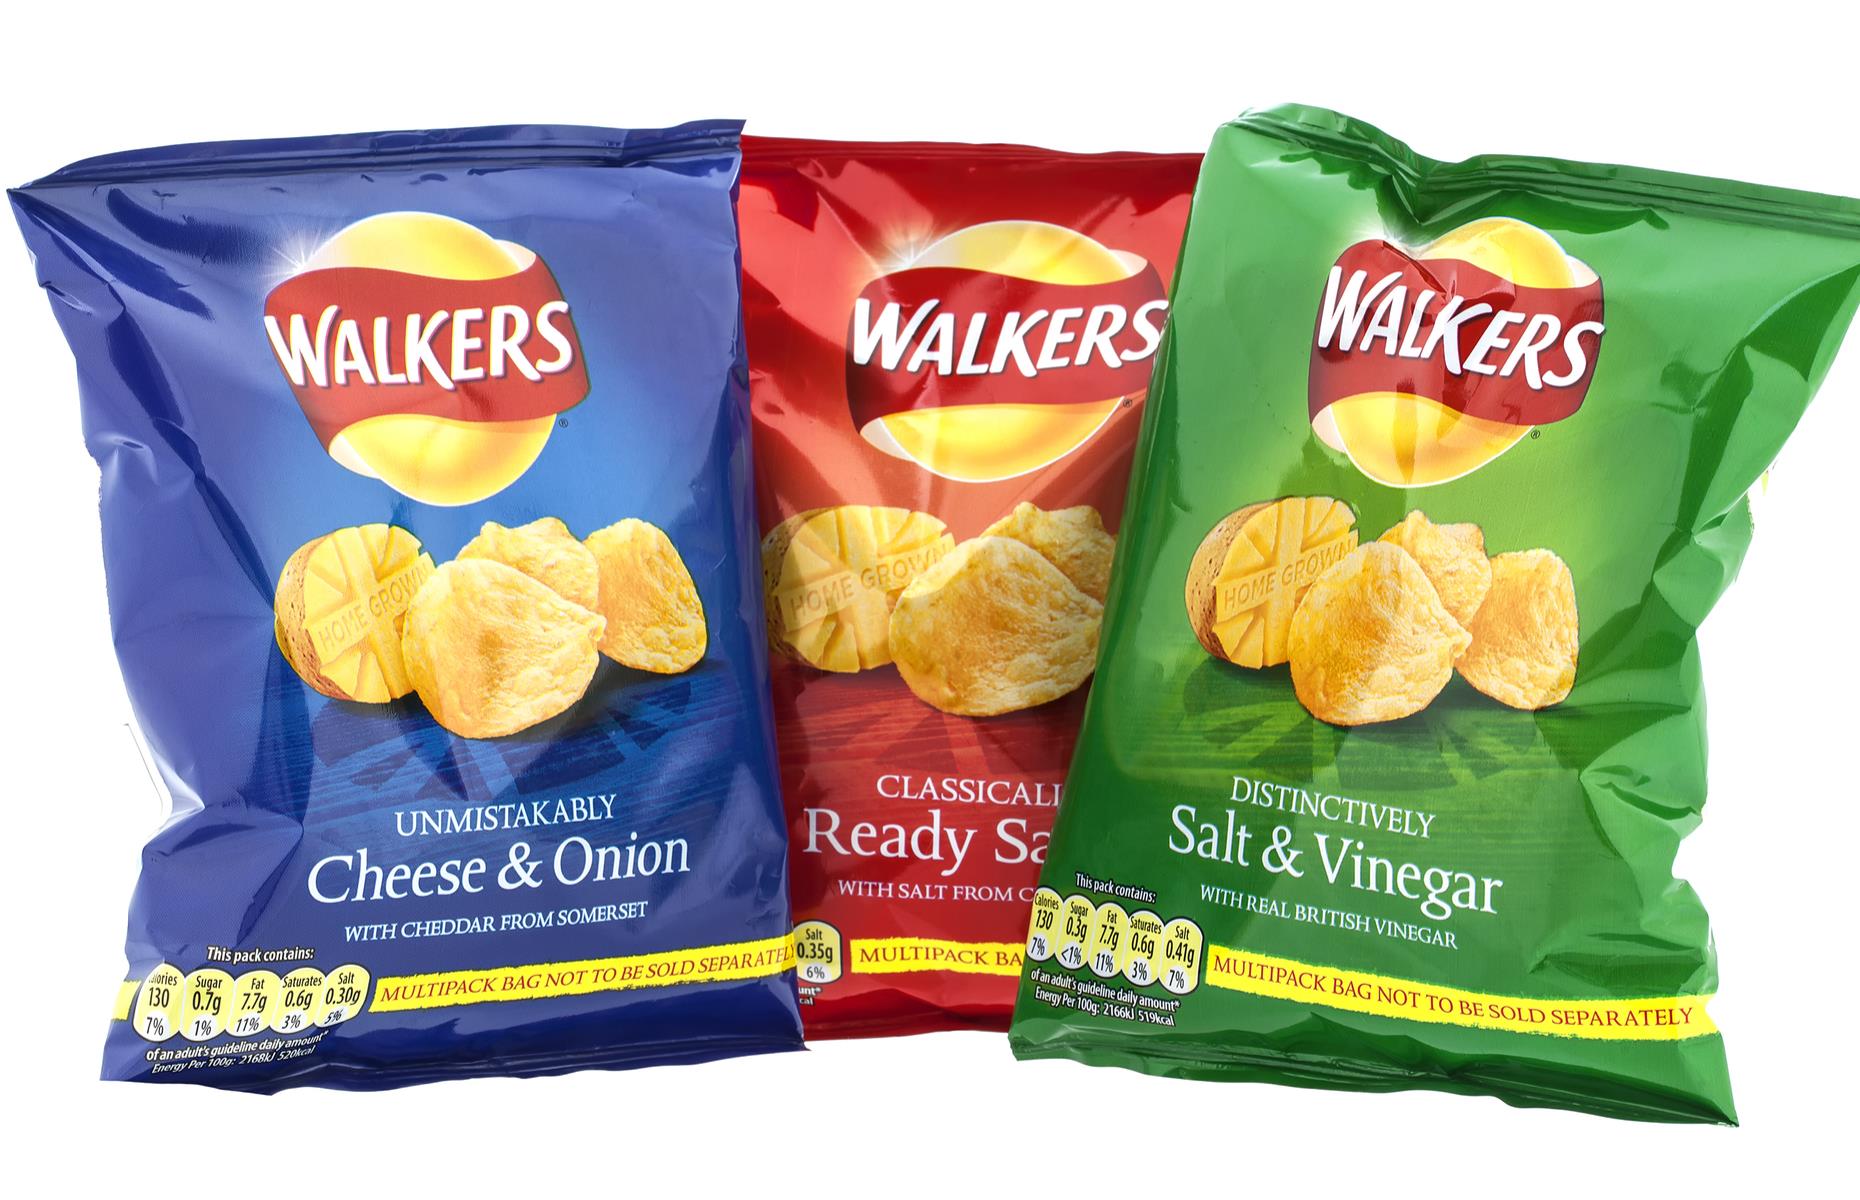 Walkers crisps were born in Leicester, England